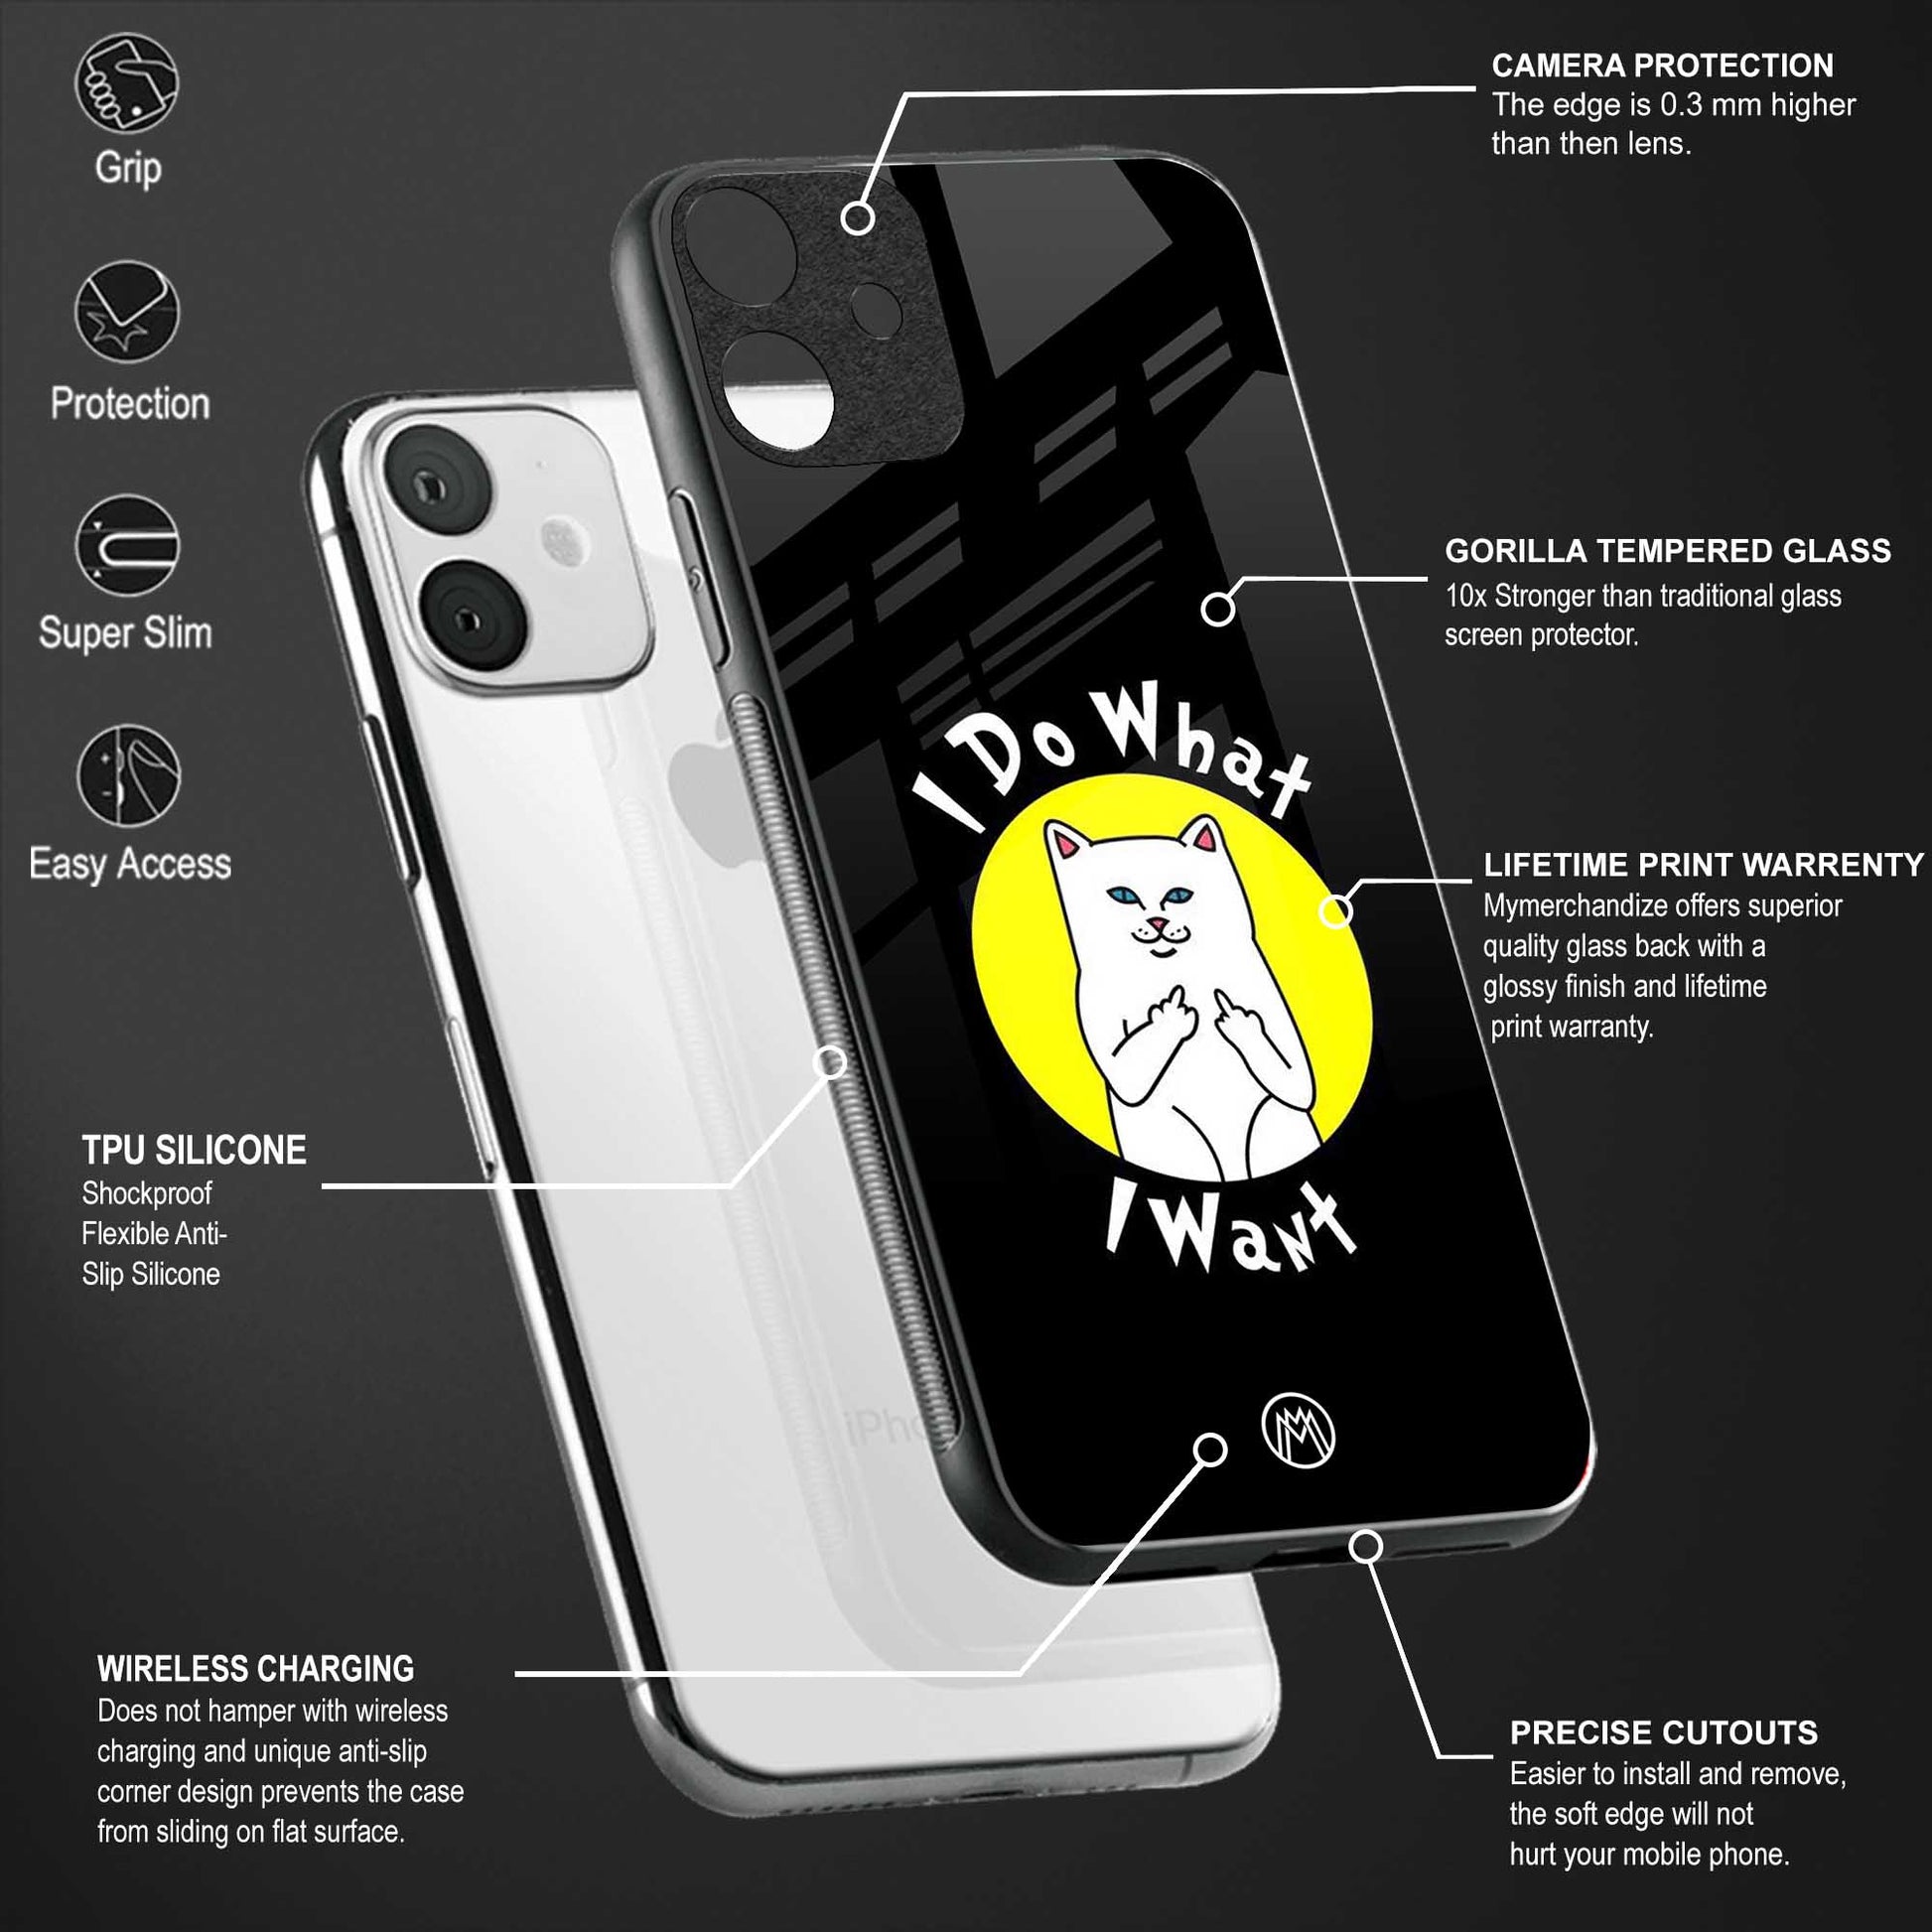 i do what i want glass case for samsung galaxy a7 2018